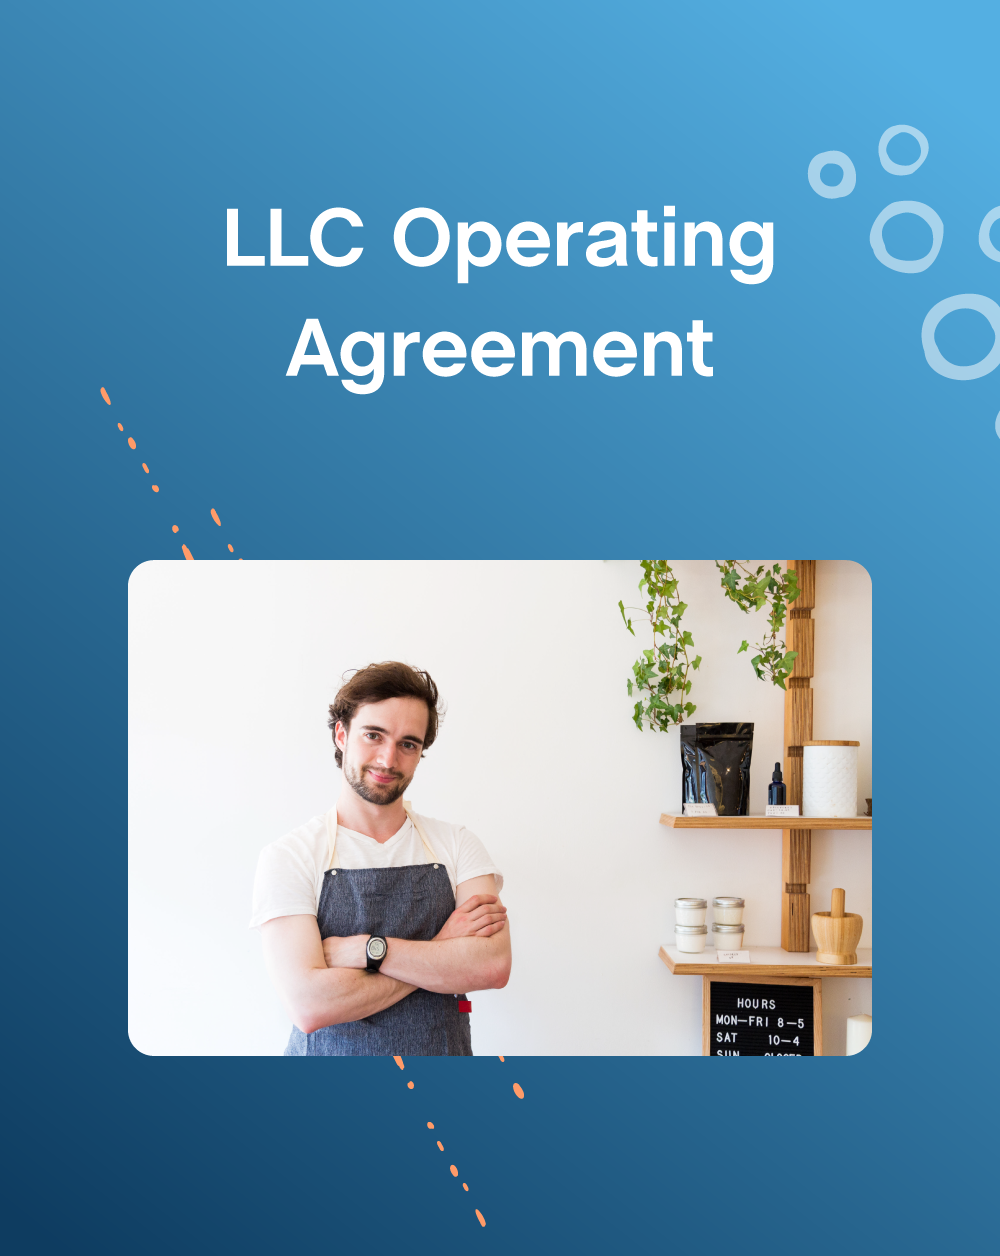 LLC Operating Agreement Contract Template - The Contract Shop®